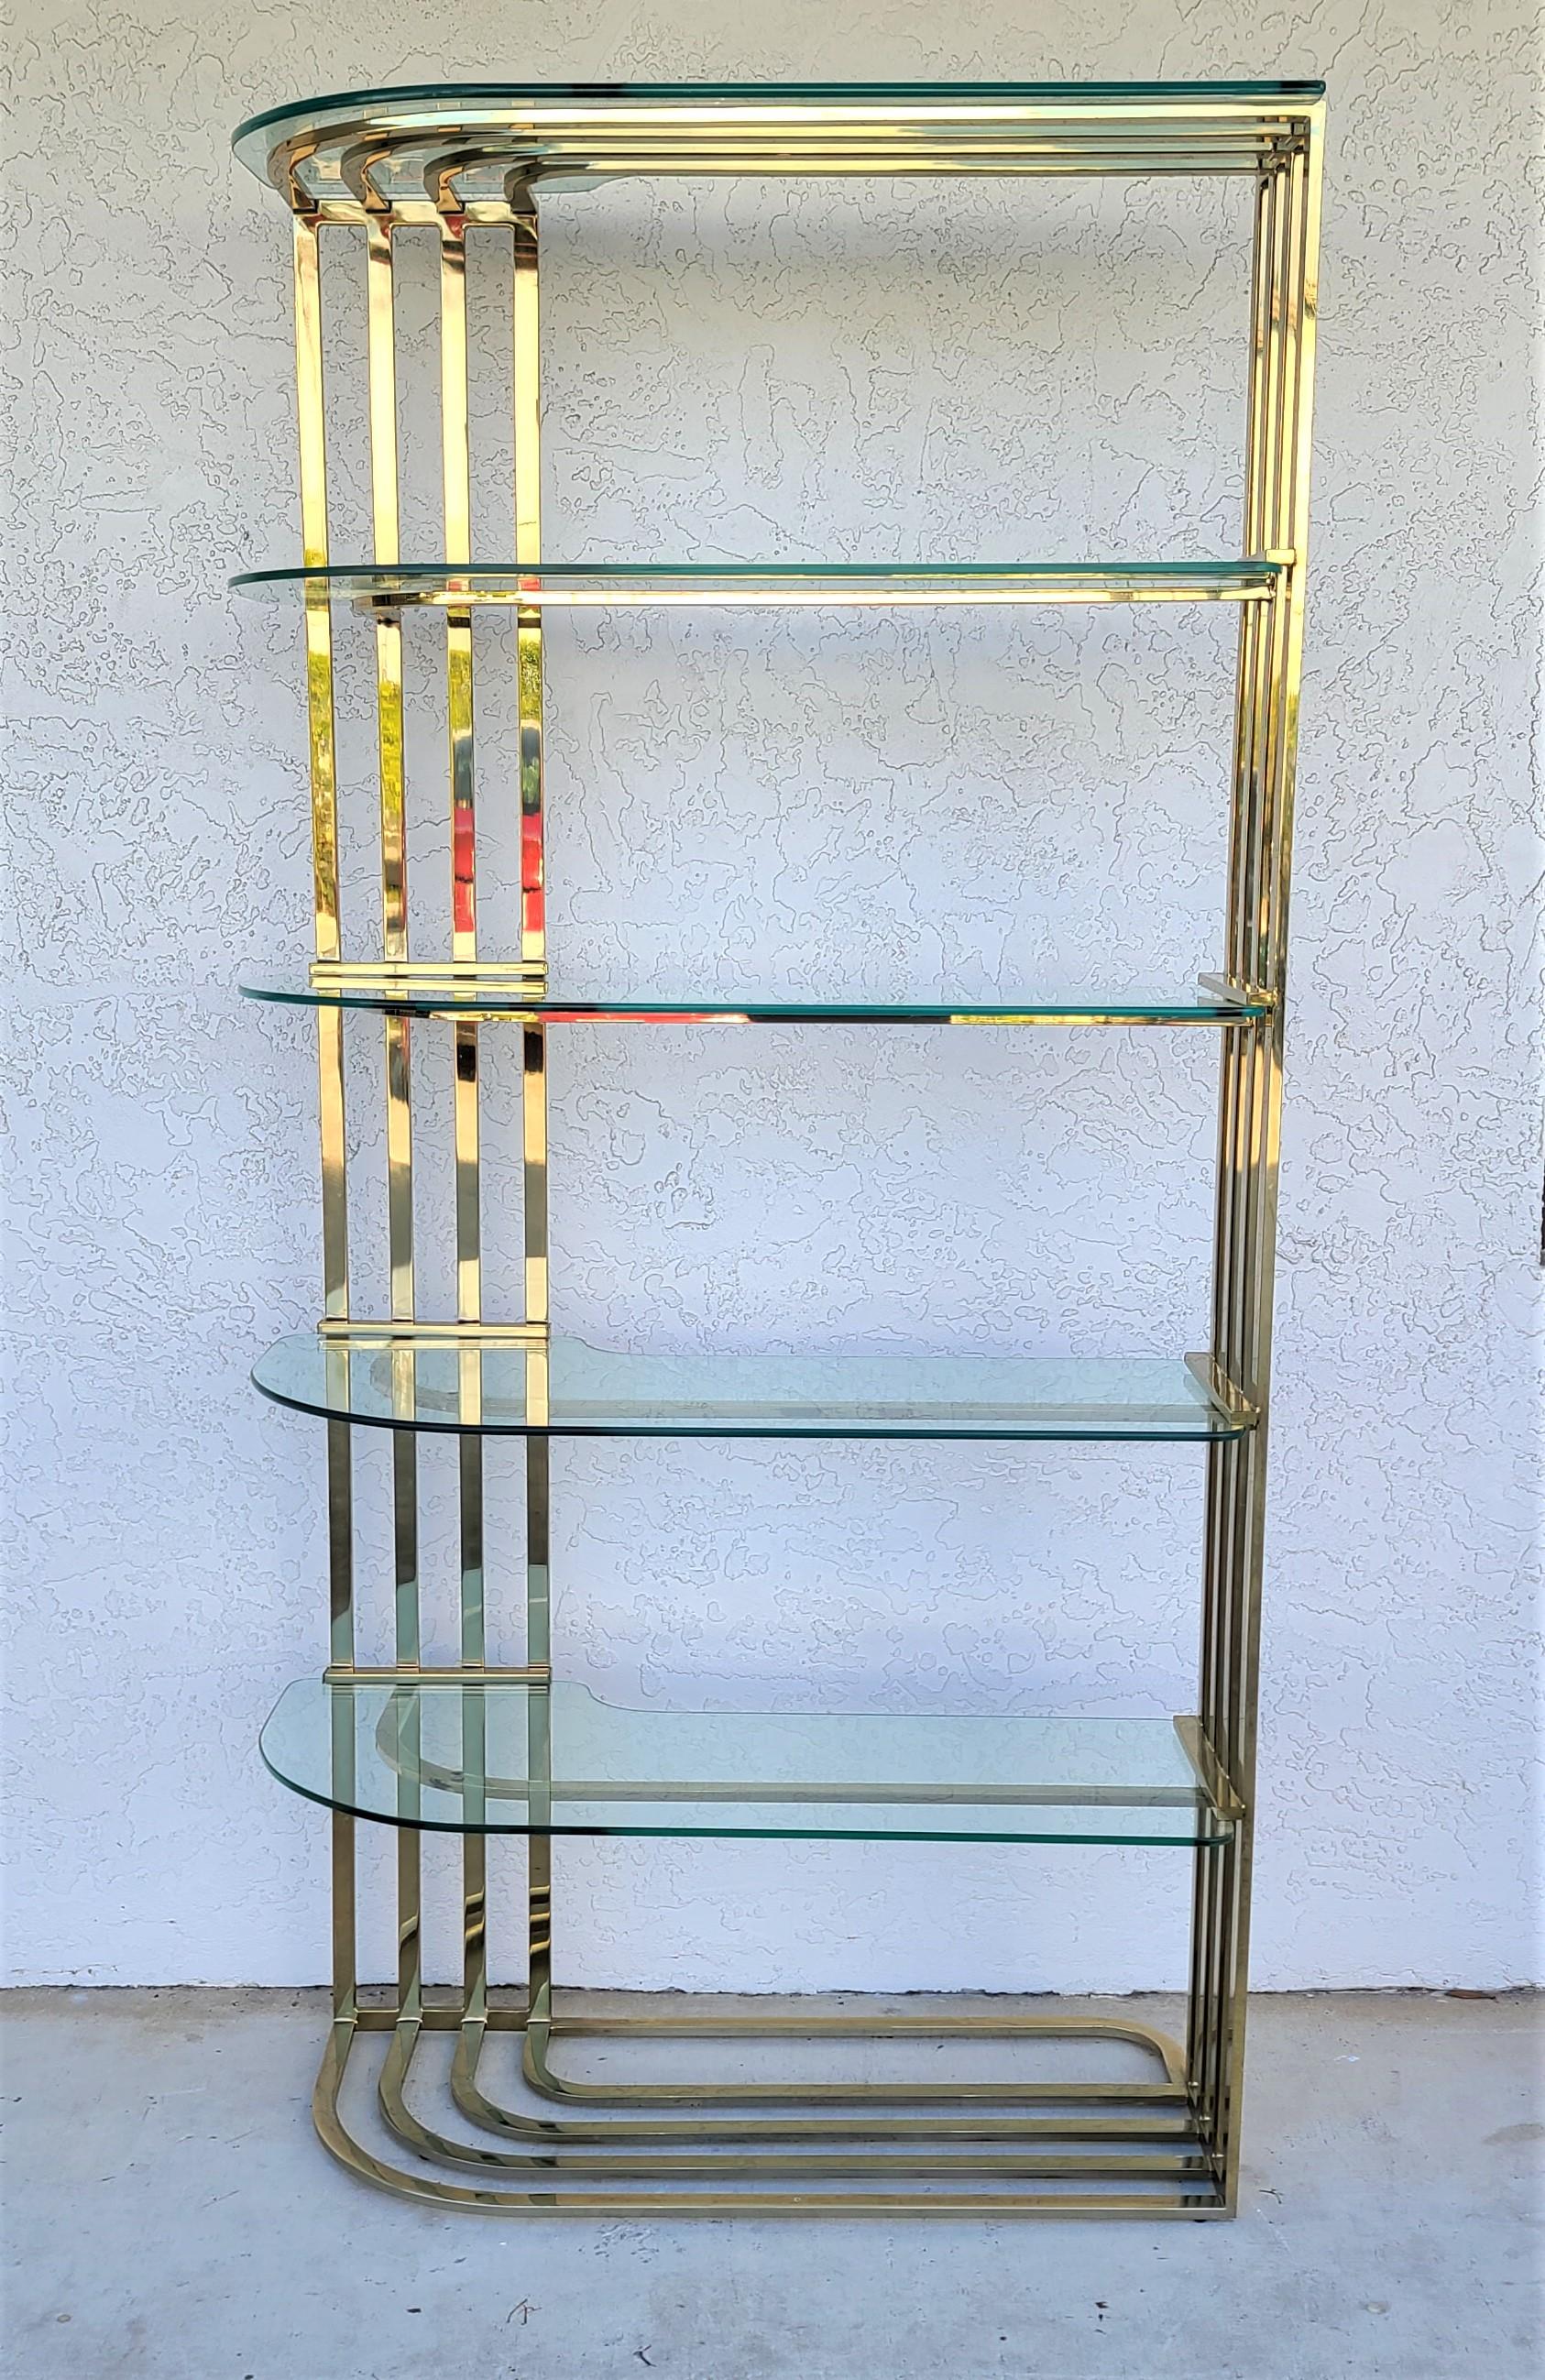 Offering One Of Our Recent Palm Beach Estate Fine Furniture Acquisitions Of A
Vintage Sculptural Brass Plate and Glass Étagère Bookcase
Custom cut glass shelves fit into grooves on both ends.
The glass shelf currently on the top shelf in the